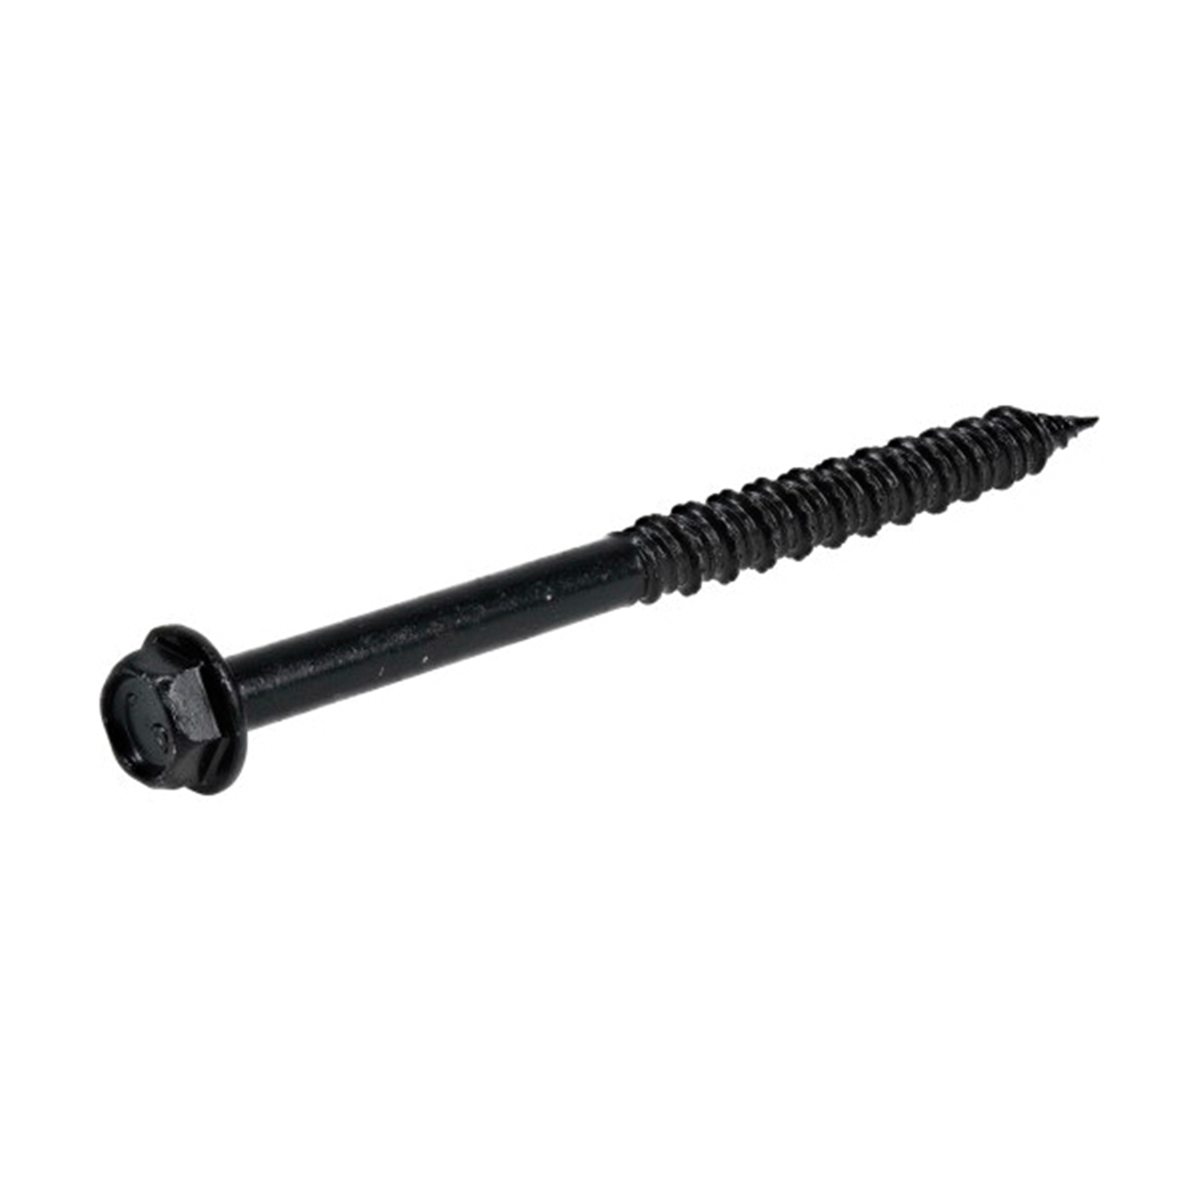 376587 Concrete Screw Anchor, 1/4 in Dia, 3-1/4 in L, Carbon Steel, Epoxy-Coated, 100/PK